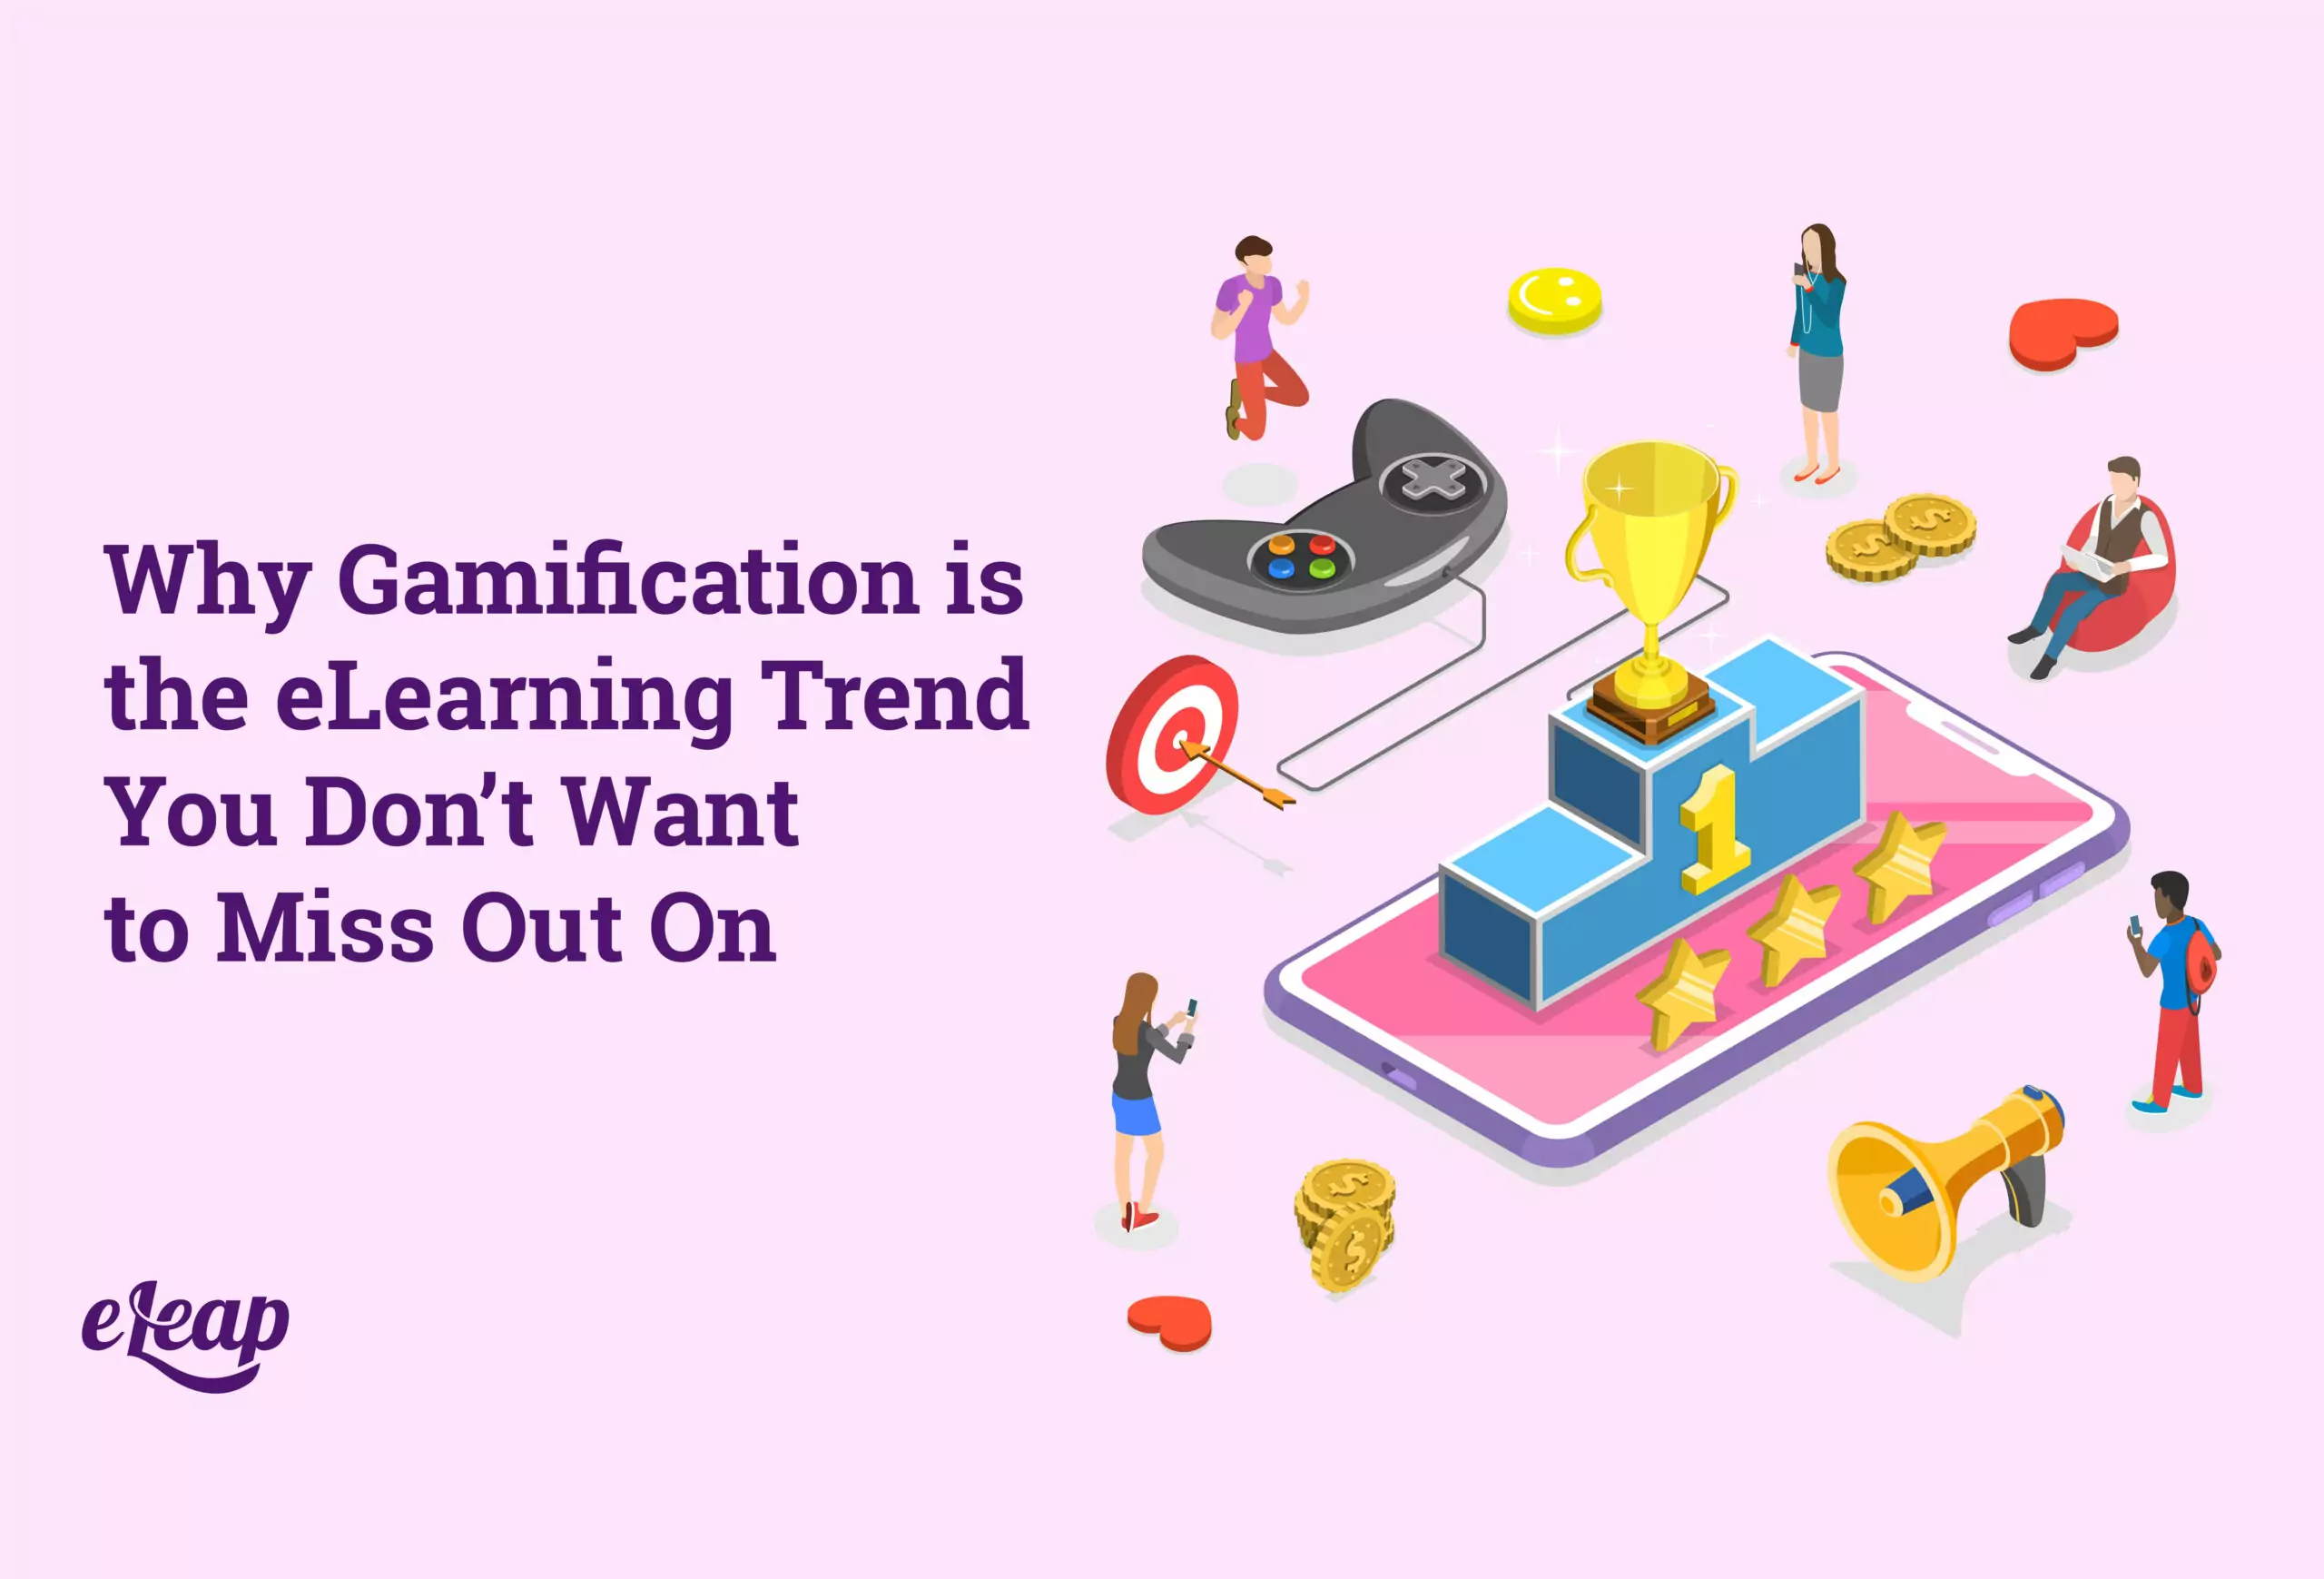 Why Gamification is the eLearning Trend You Don’t Want to Miss Out On